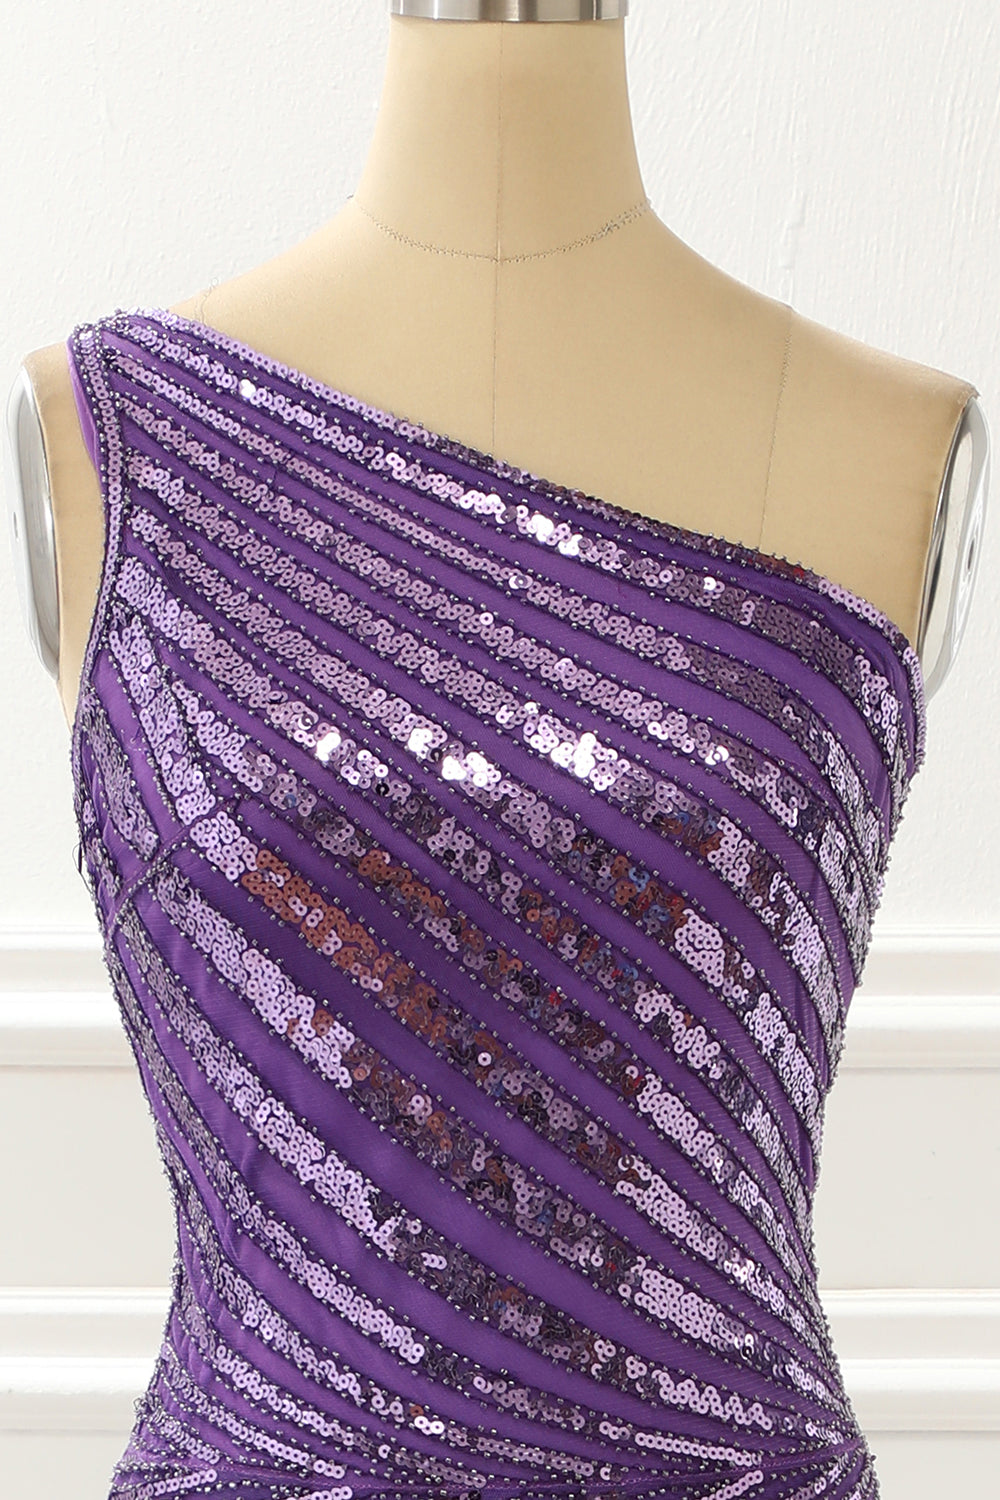 Prom Dresses For 20 Year Olds, One Shoulder Purple Sequin Prom Dress with Slit